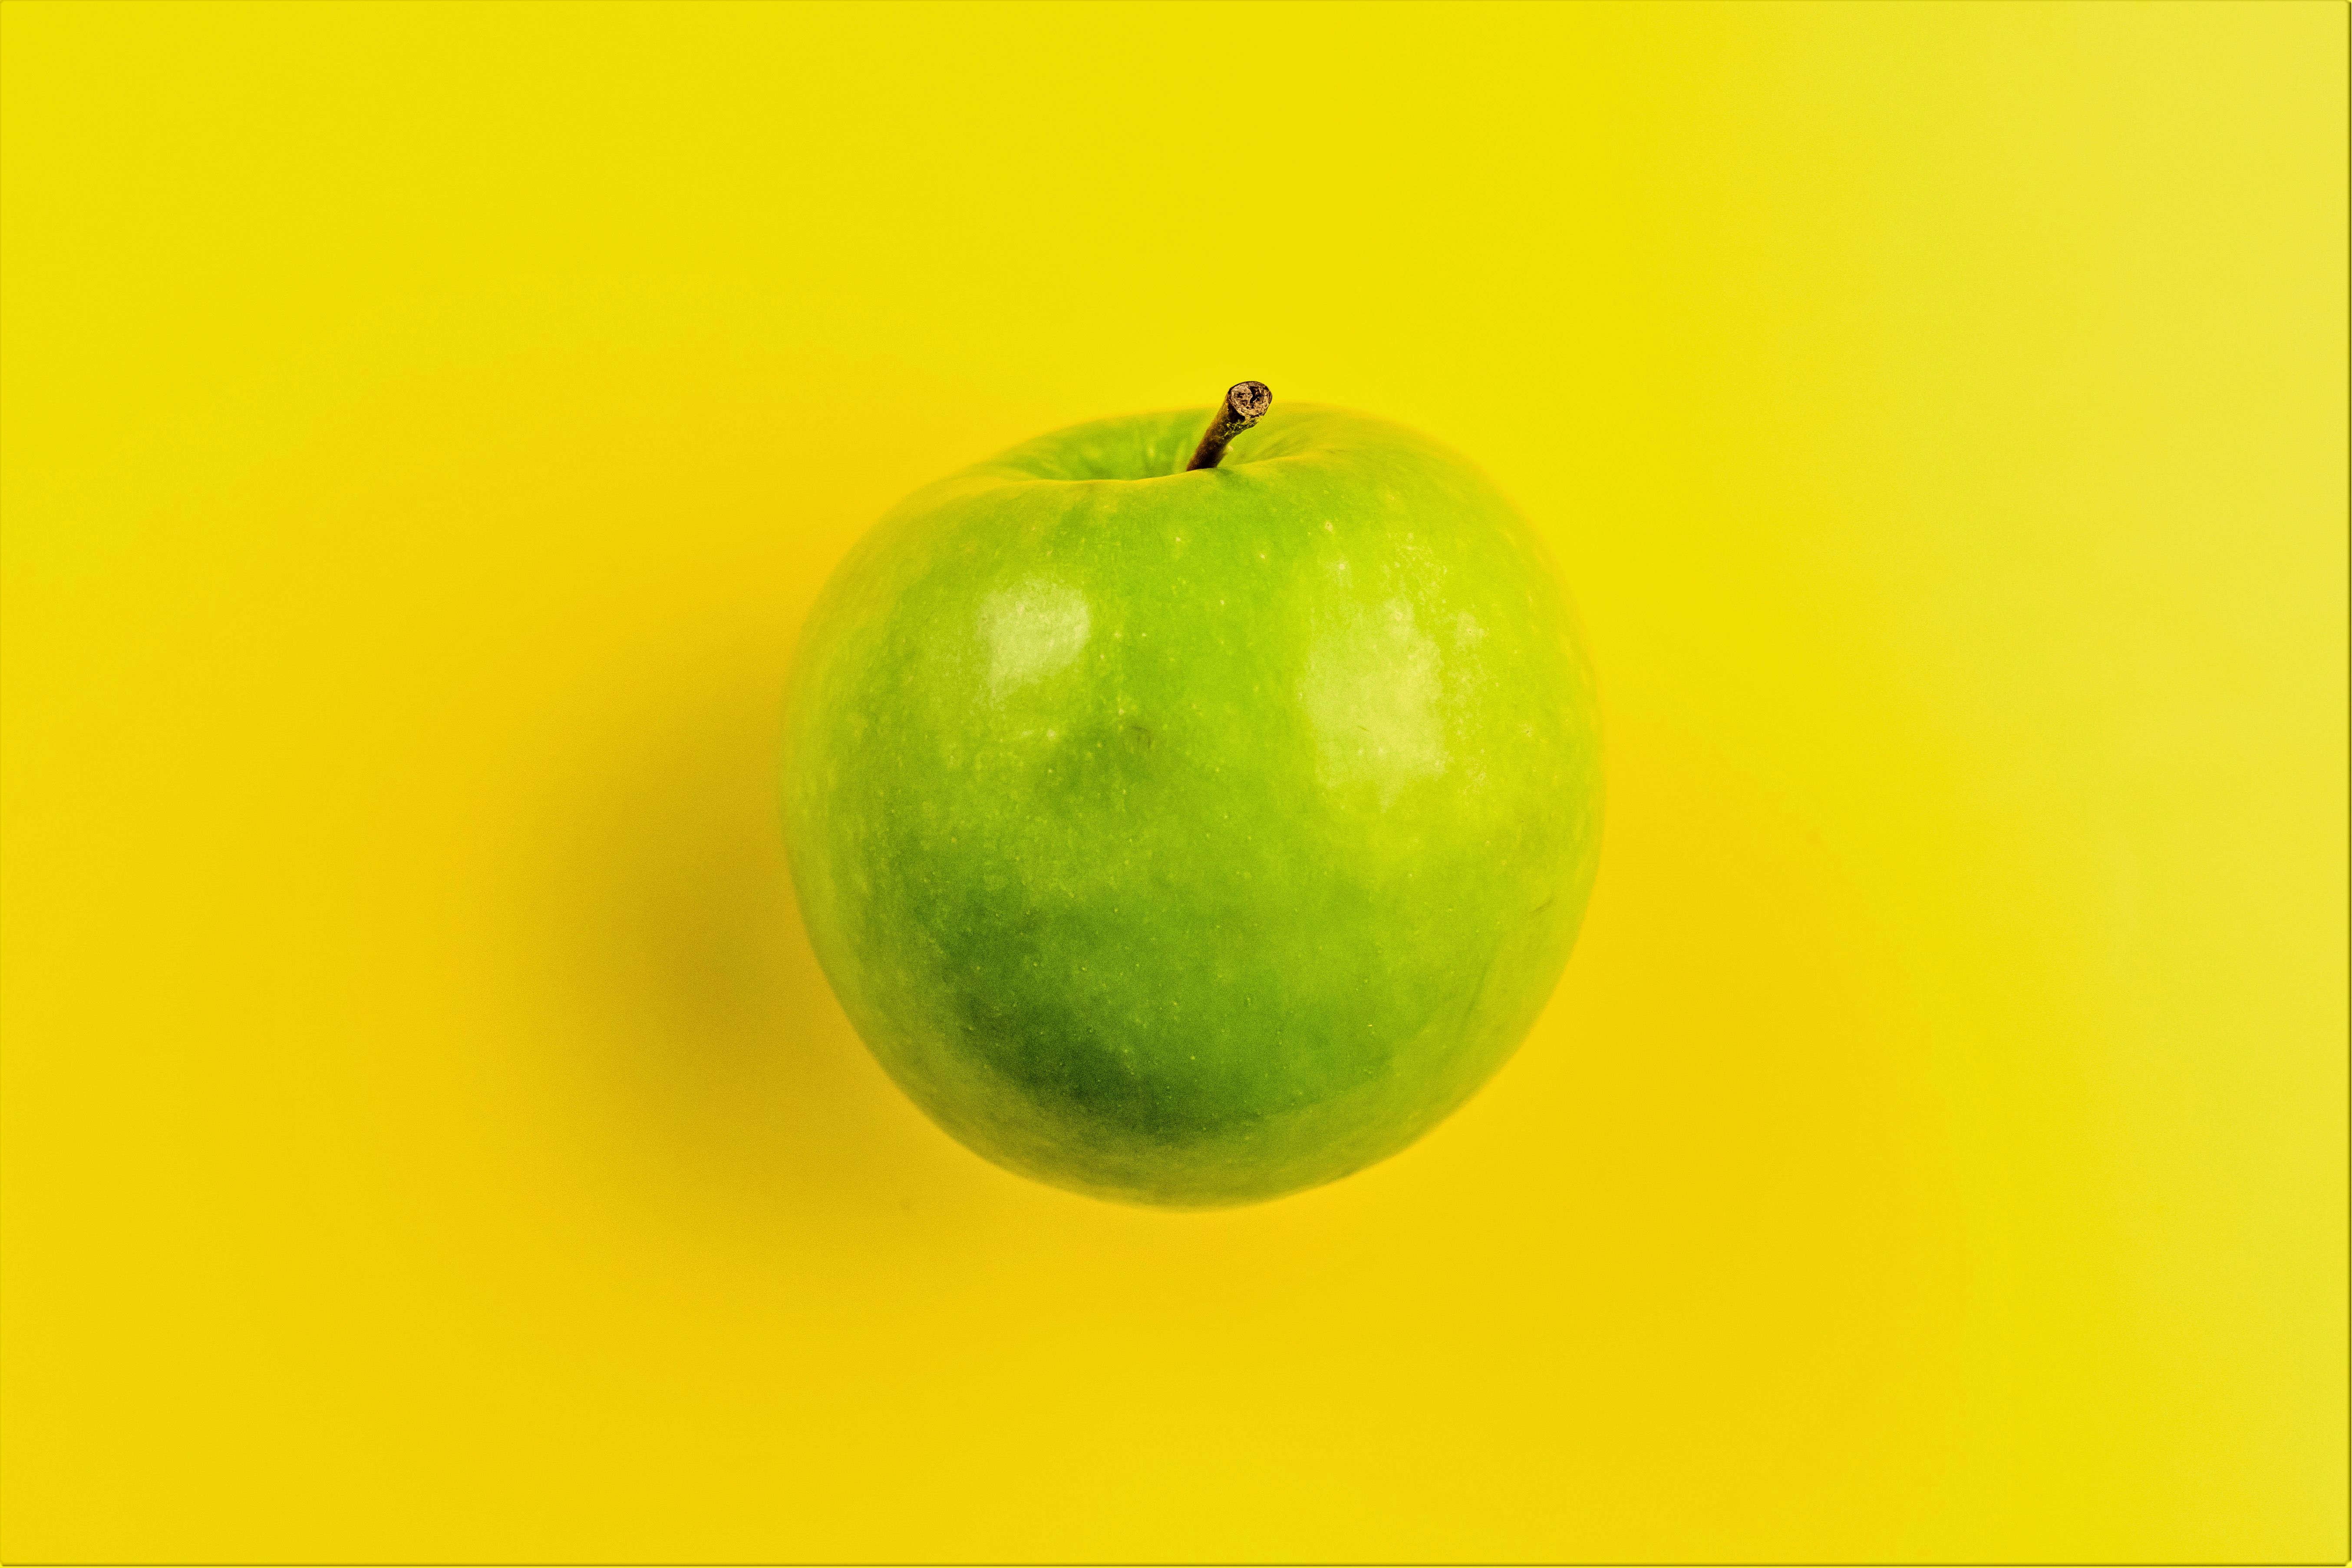 A green apple on a yellow background